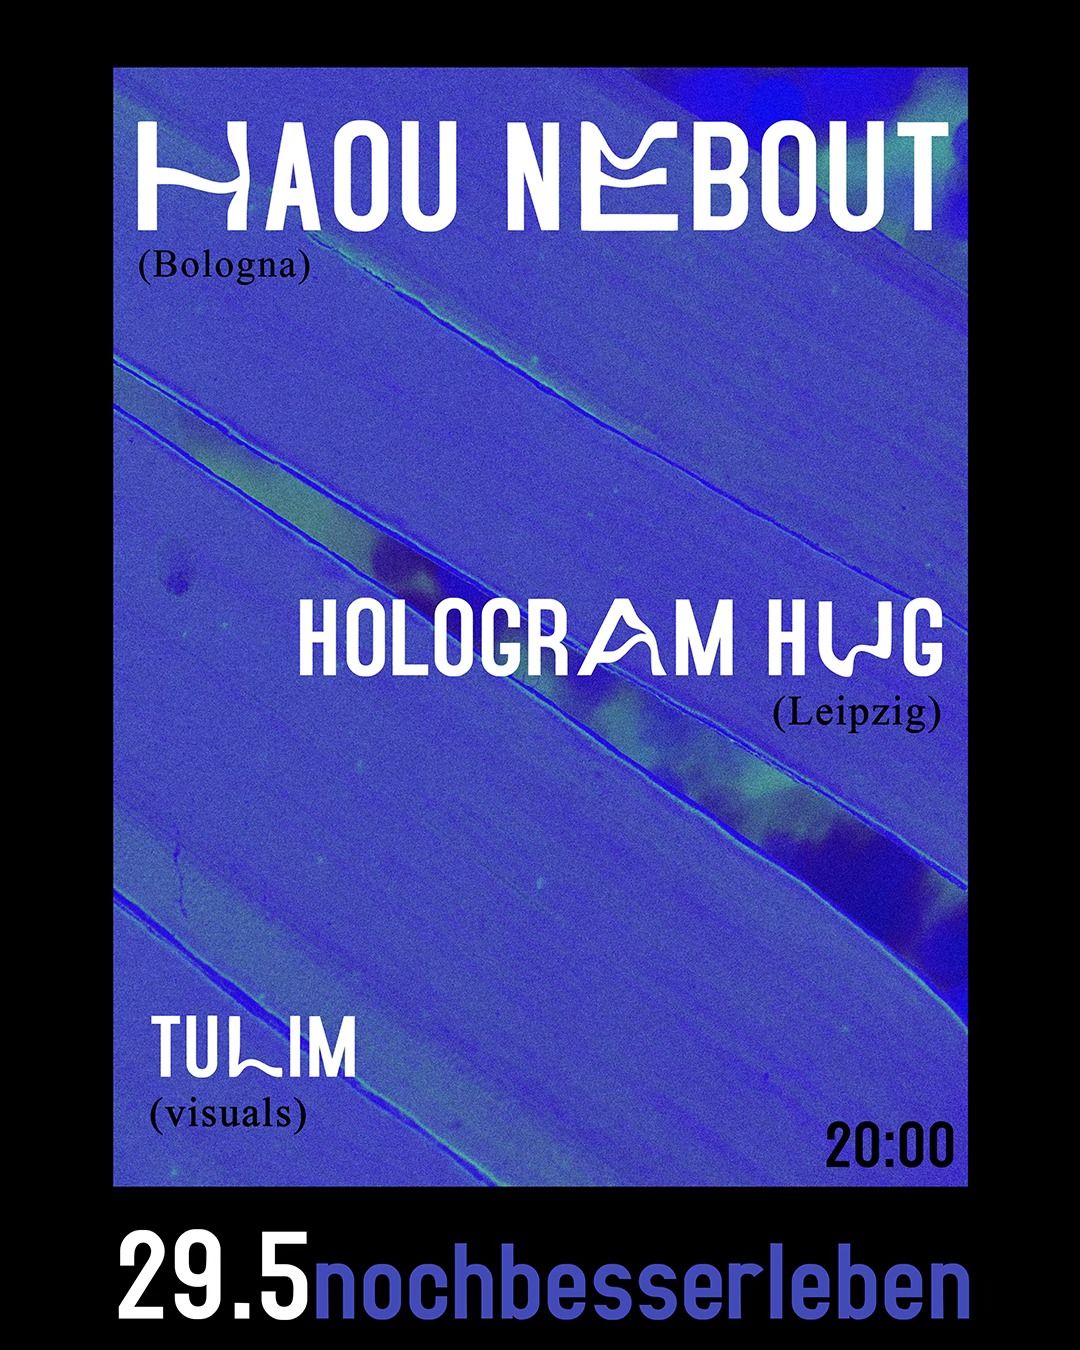 Haou Nebout (IT) + Hologram Hug + Visuals by Tulim